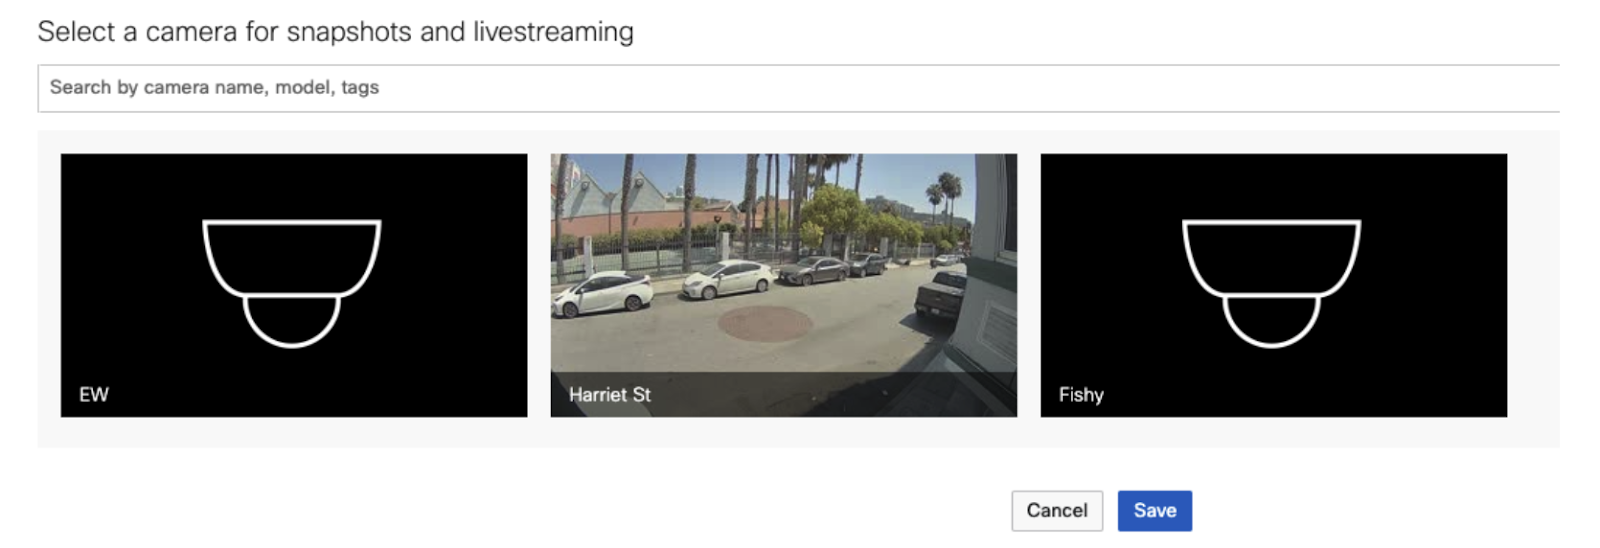 Dashboard UI camera selection showing 3 cameras with only the 2nd one being online and showing footage